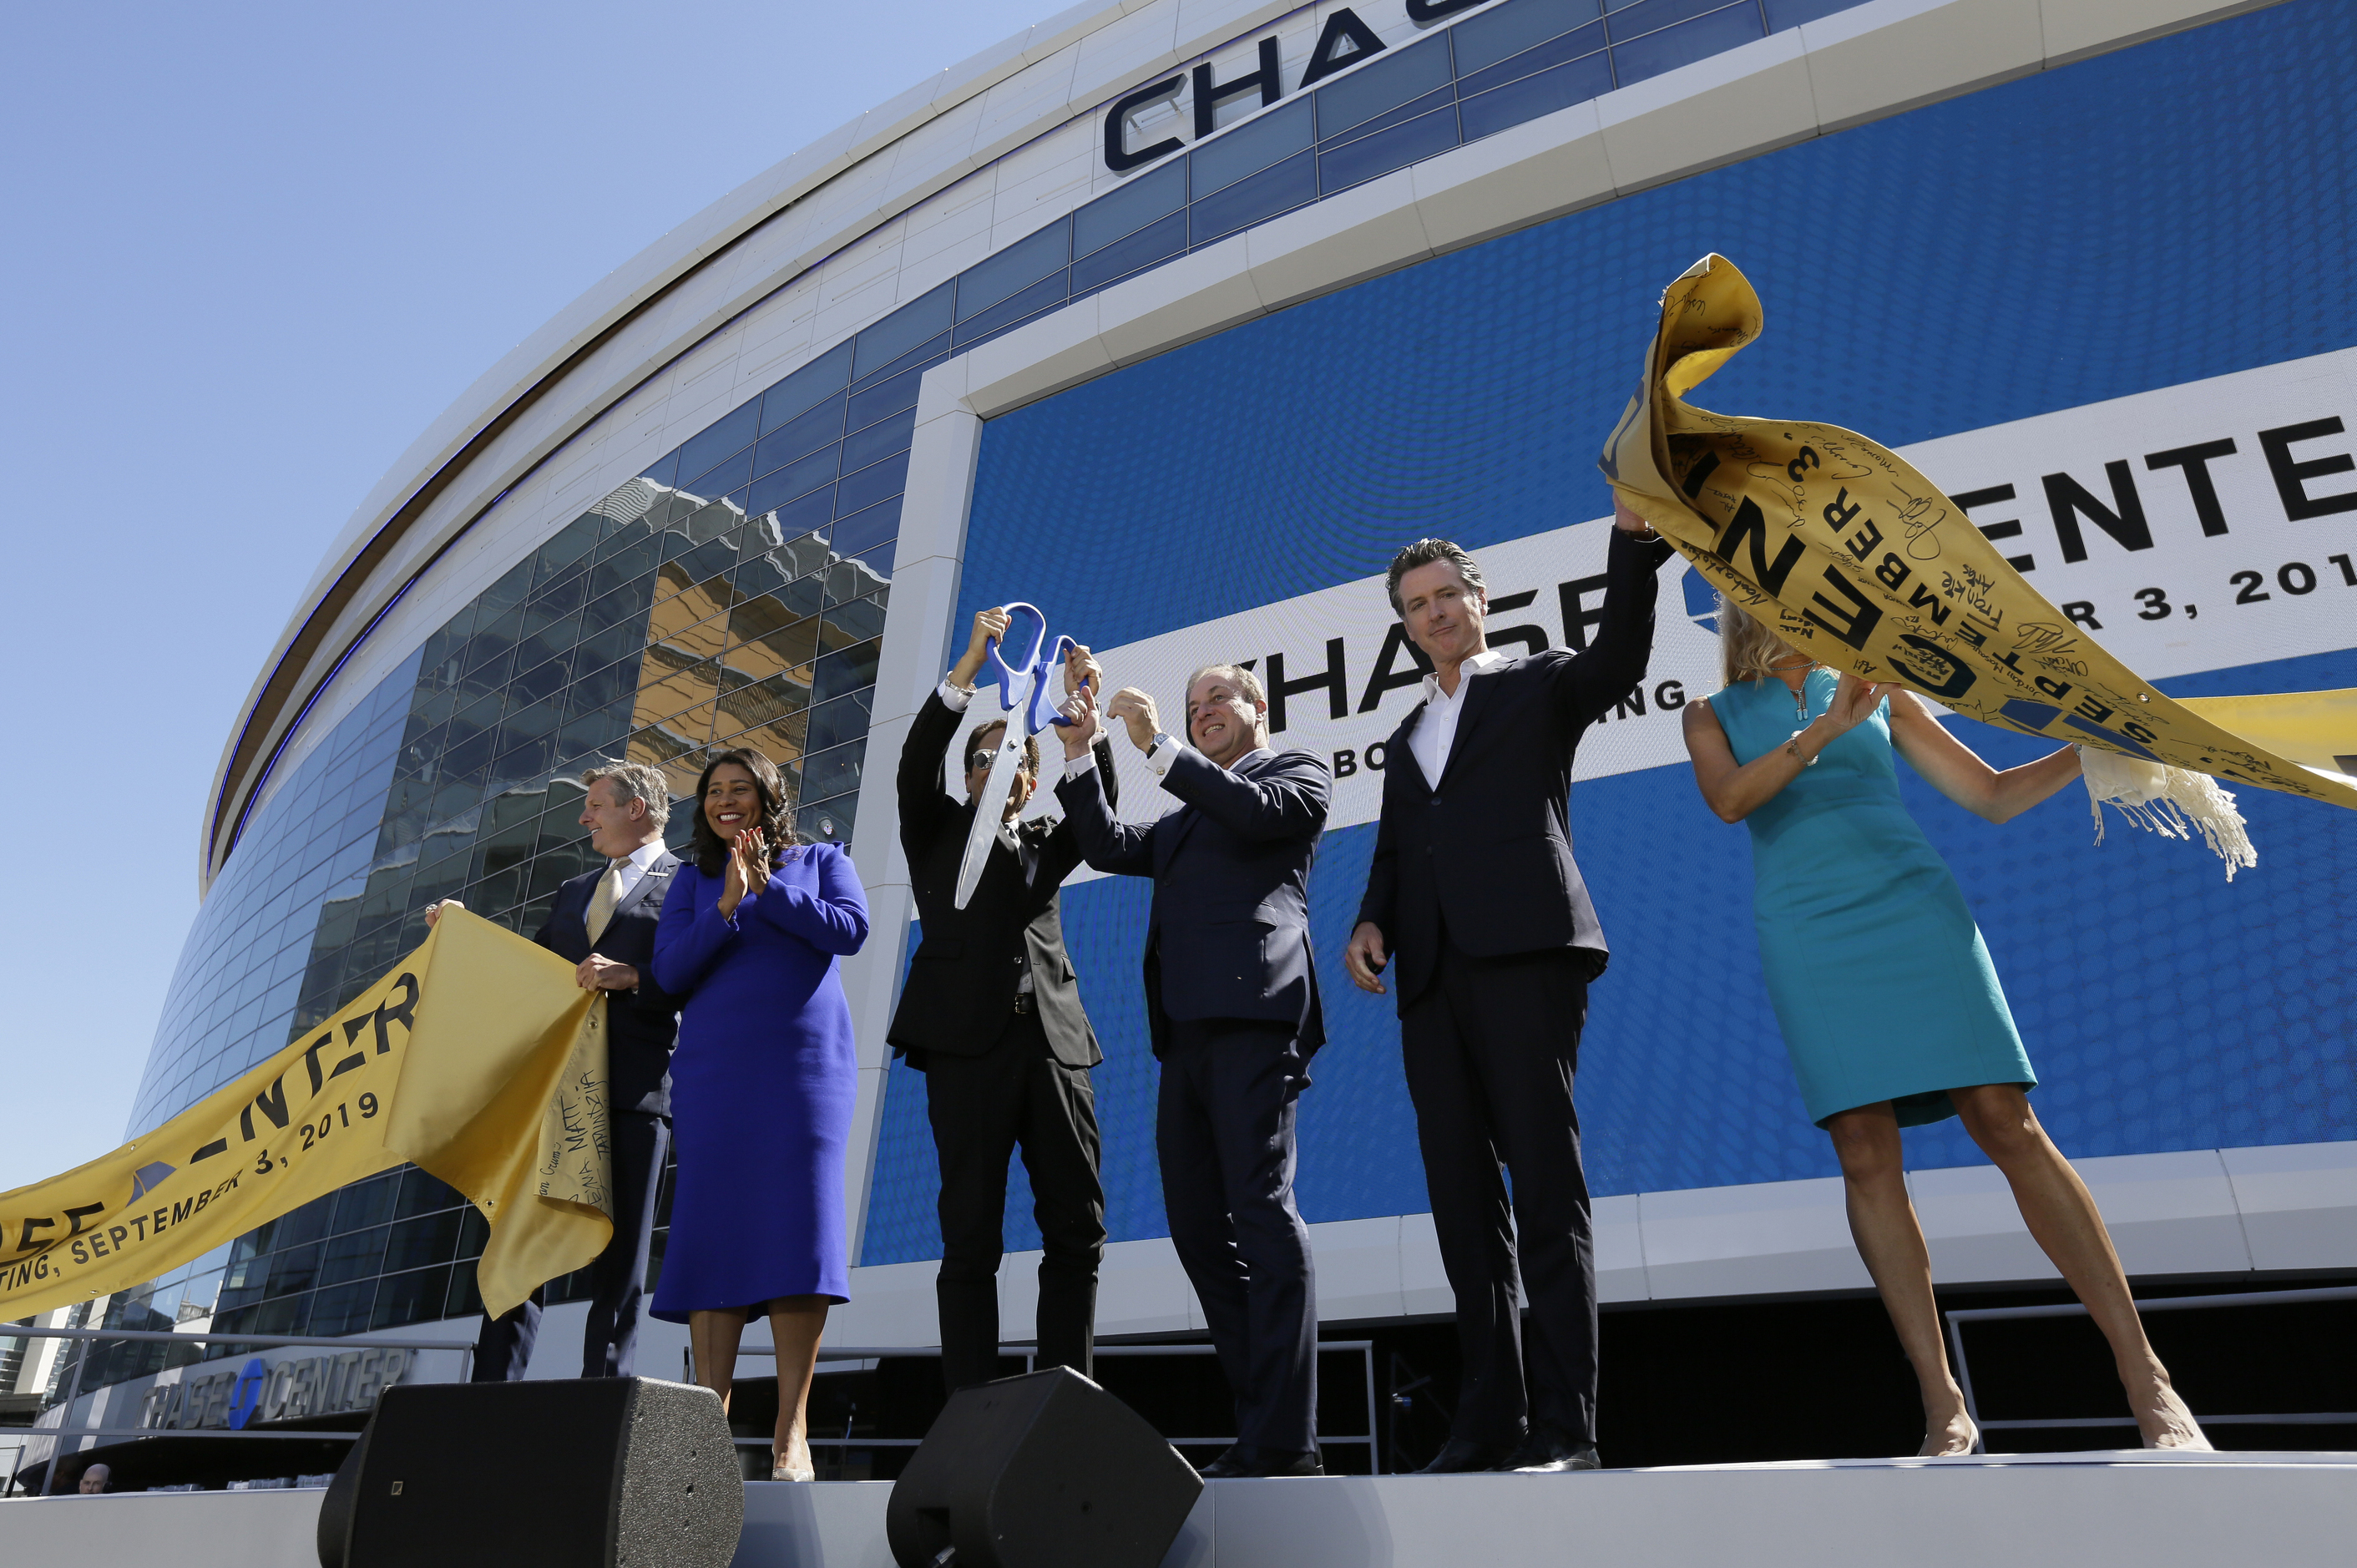 Report: In new Chase Center, Warriors will take in $700 million in